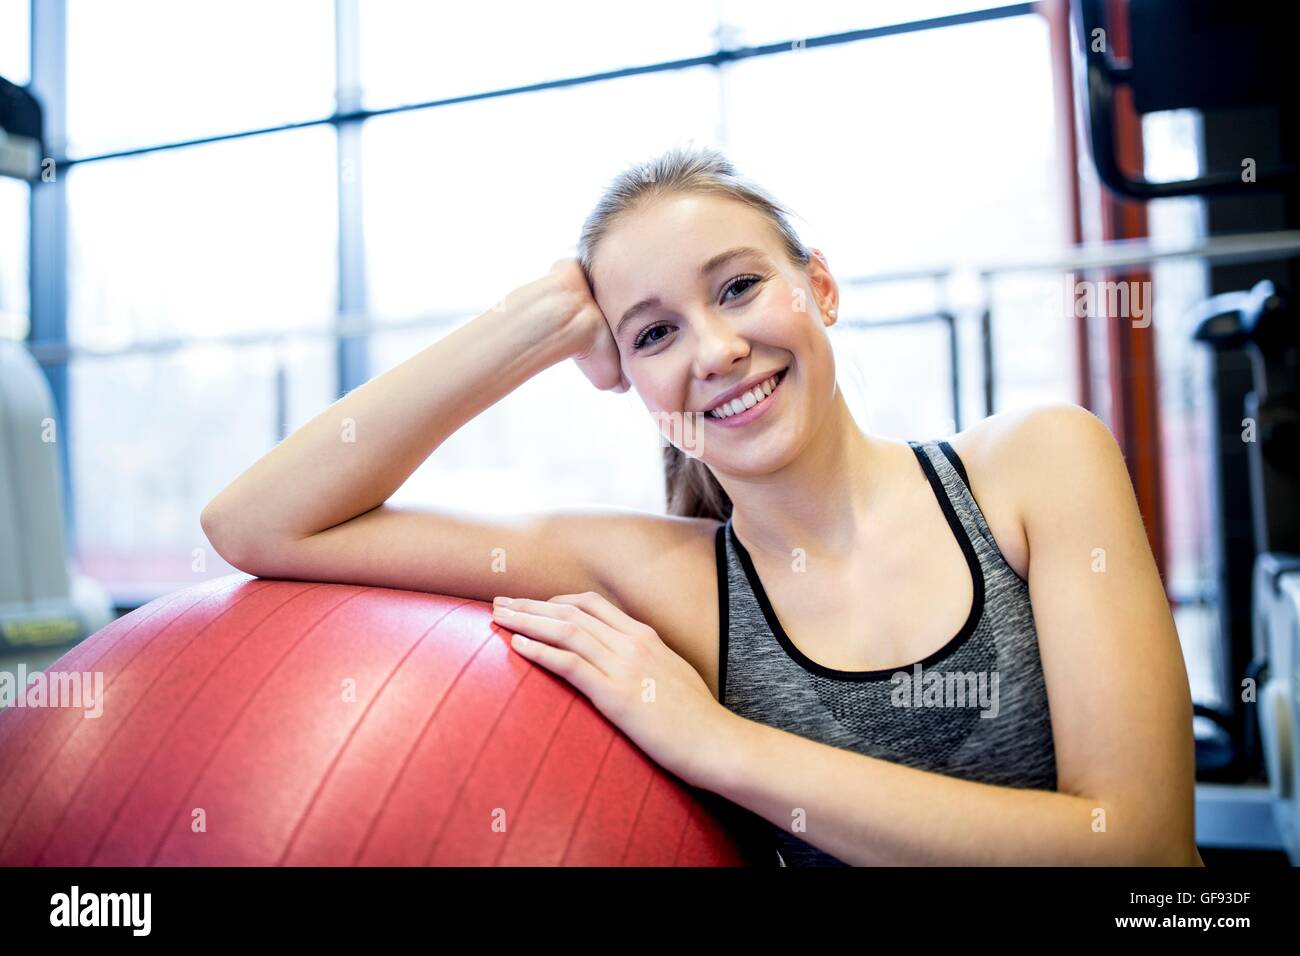 PROPERTY RELEASED. MODEL RELEASED. Portrait of young woman with fitness ball in gym. Stock Photo